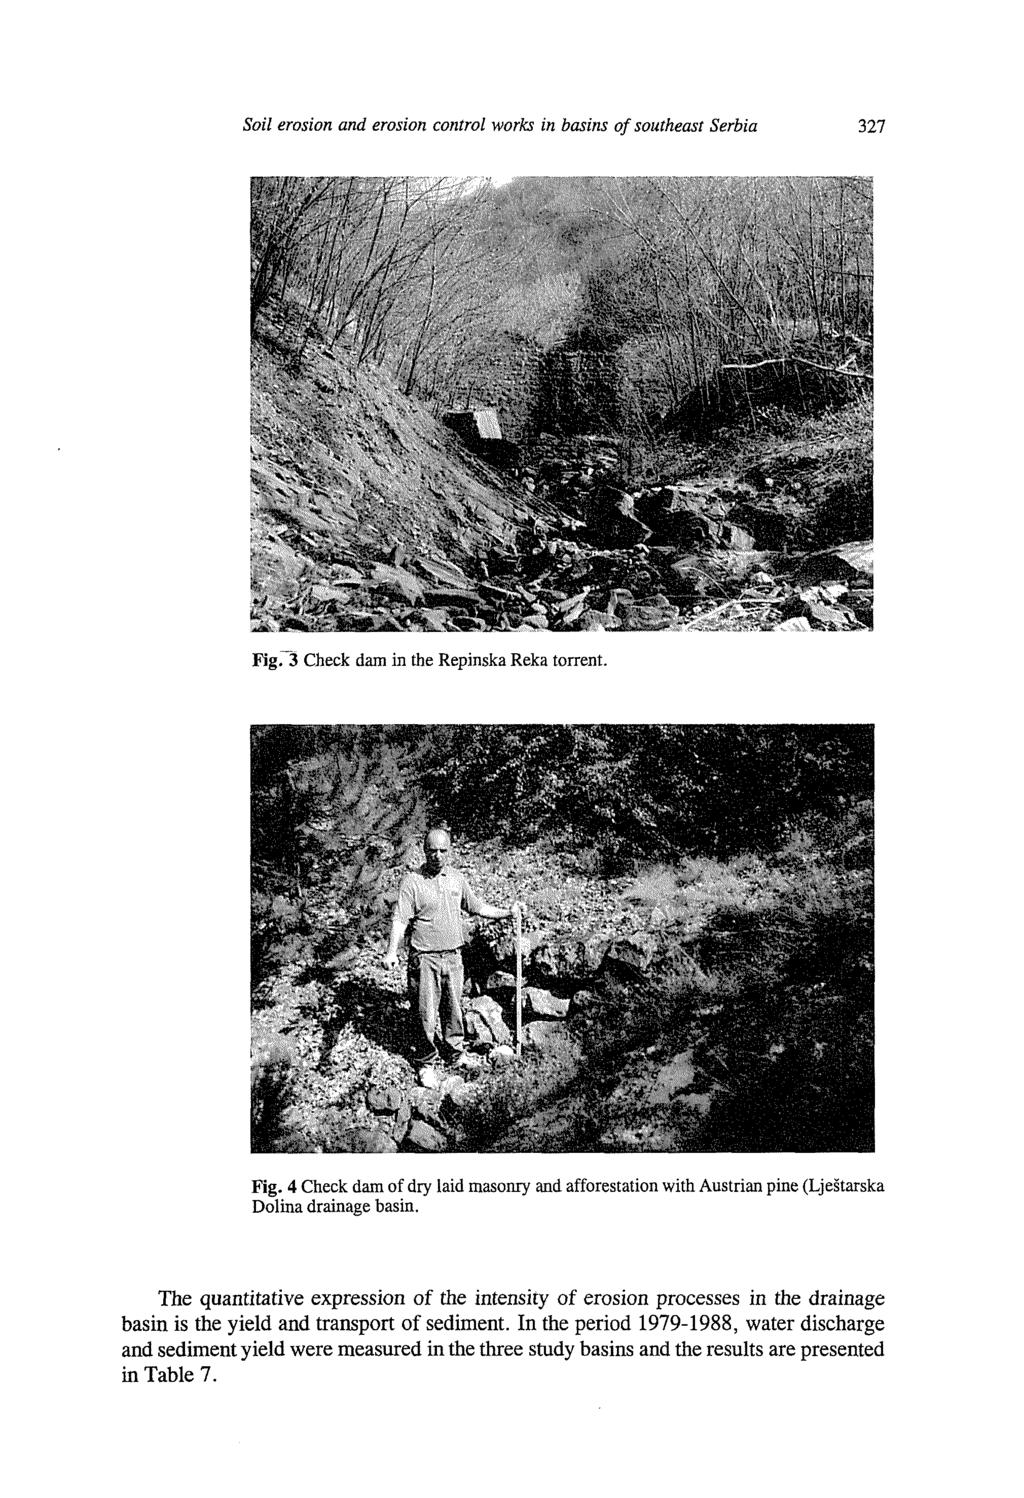 Soil erosion and erosion control works in basins of southeast Serbia 327 Fig. 3 Check dam in the Repinska Reka torrent. Fig. 4 Check dam of dry laid masonry and afforestation with Austrian pine (Ljestarska Dolina drainage basin.